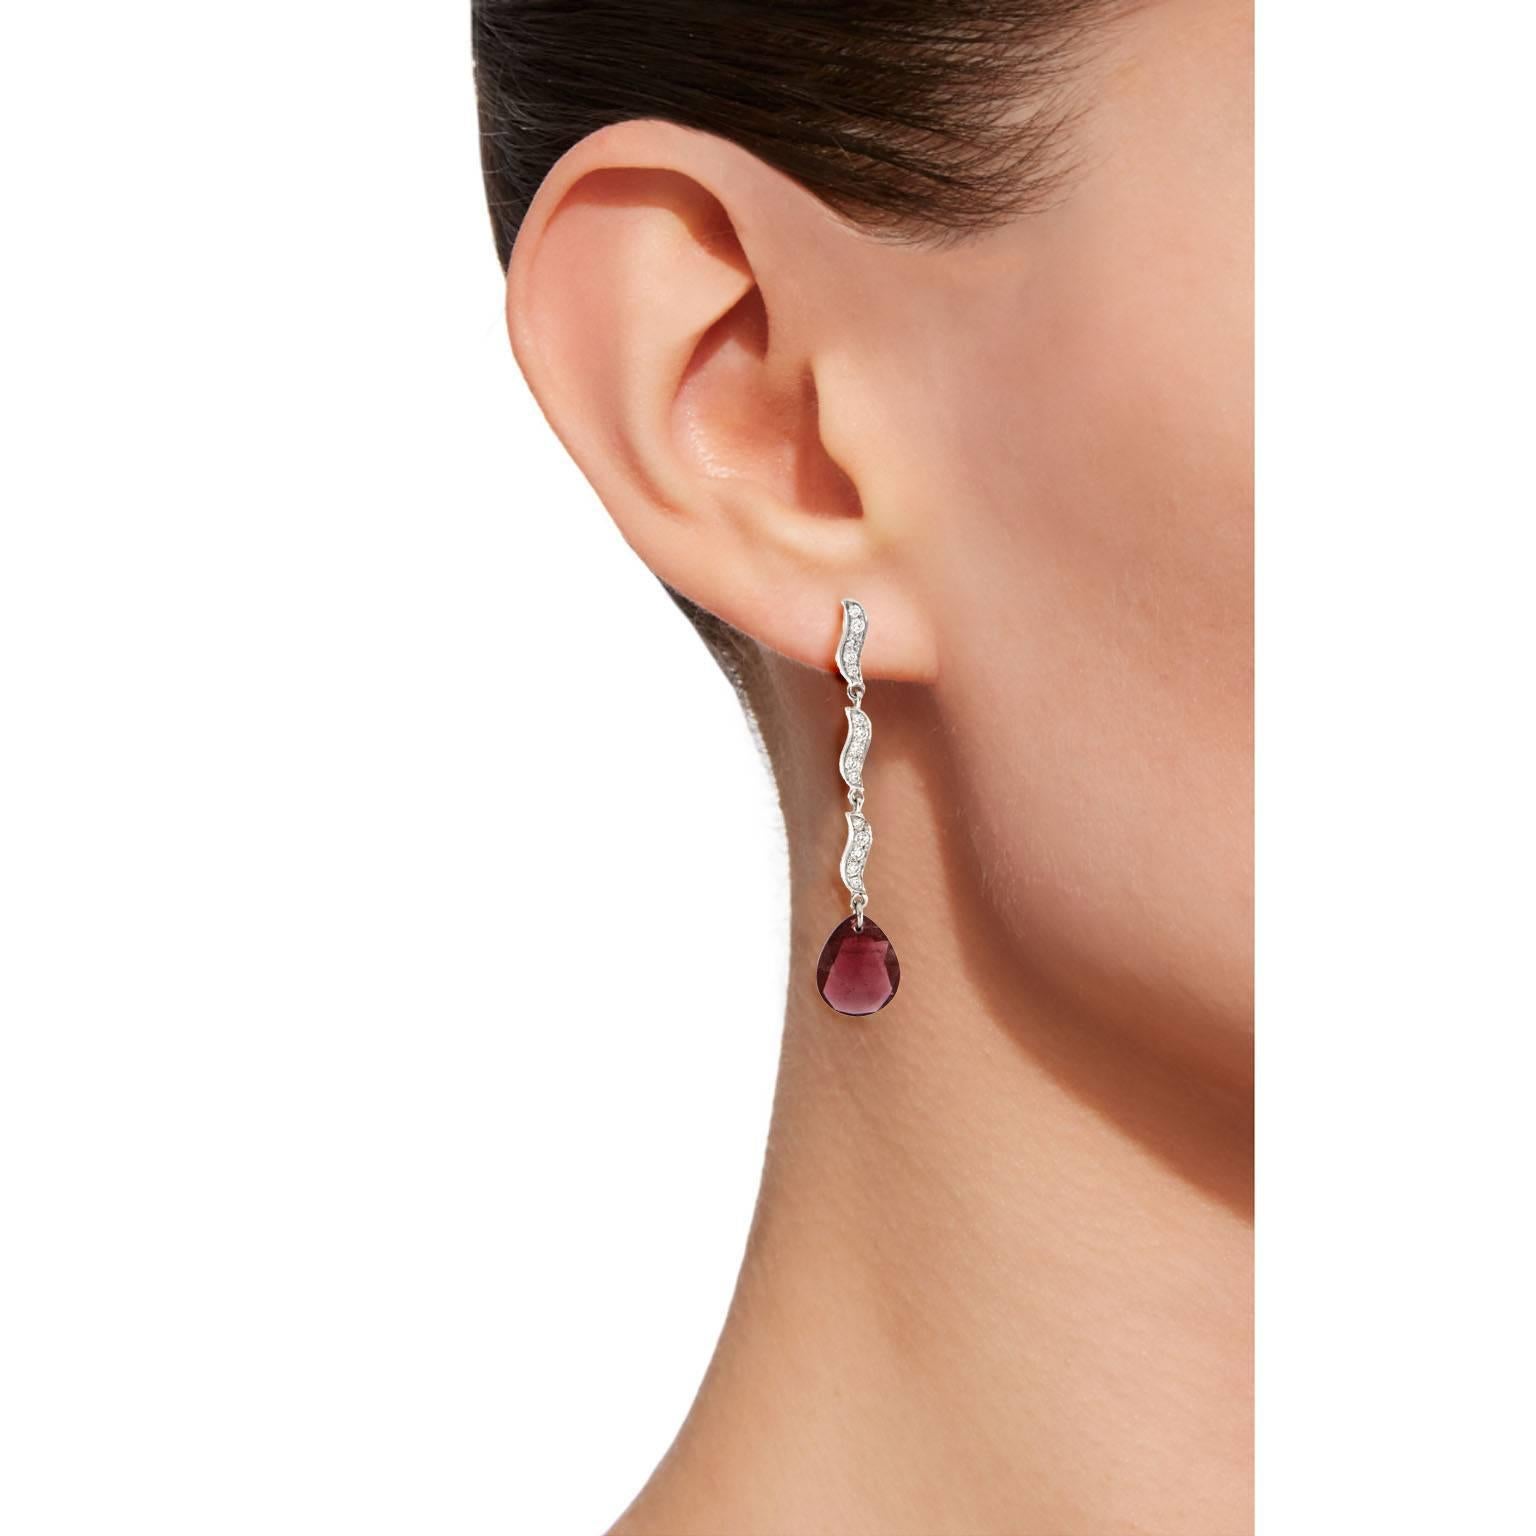 Jona design collection, hand crafted in Italy, 18 karat white gold dangling pendant earrings suspending two pear shape rubelite stones weighing 6.65 carats hung to 0.44 carats of white diamond ribbons.
DIMENSIONS: 1.85 in. H x 0.36 in. W x 0.13 in.